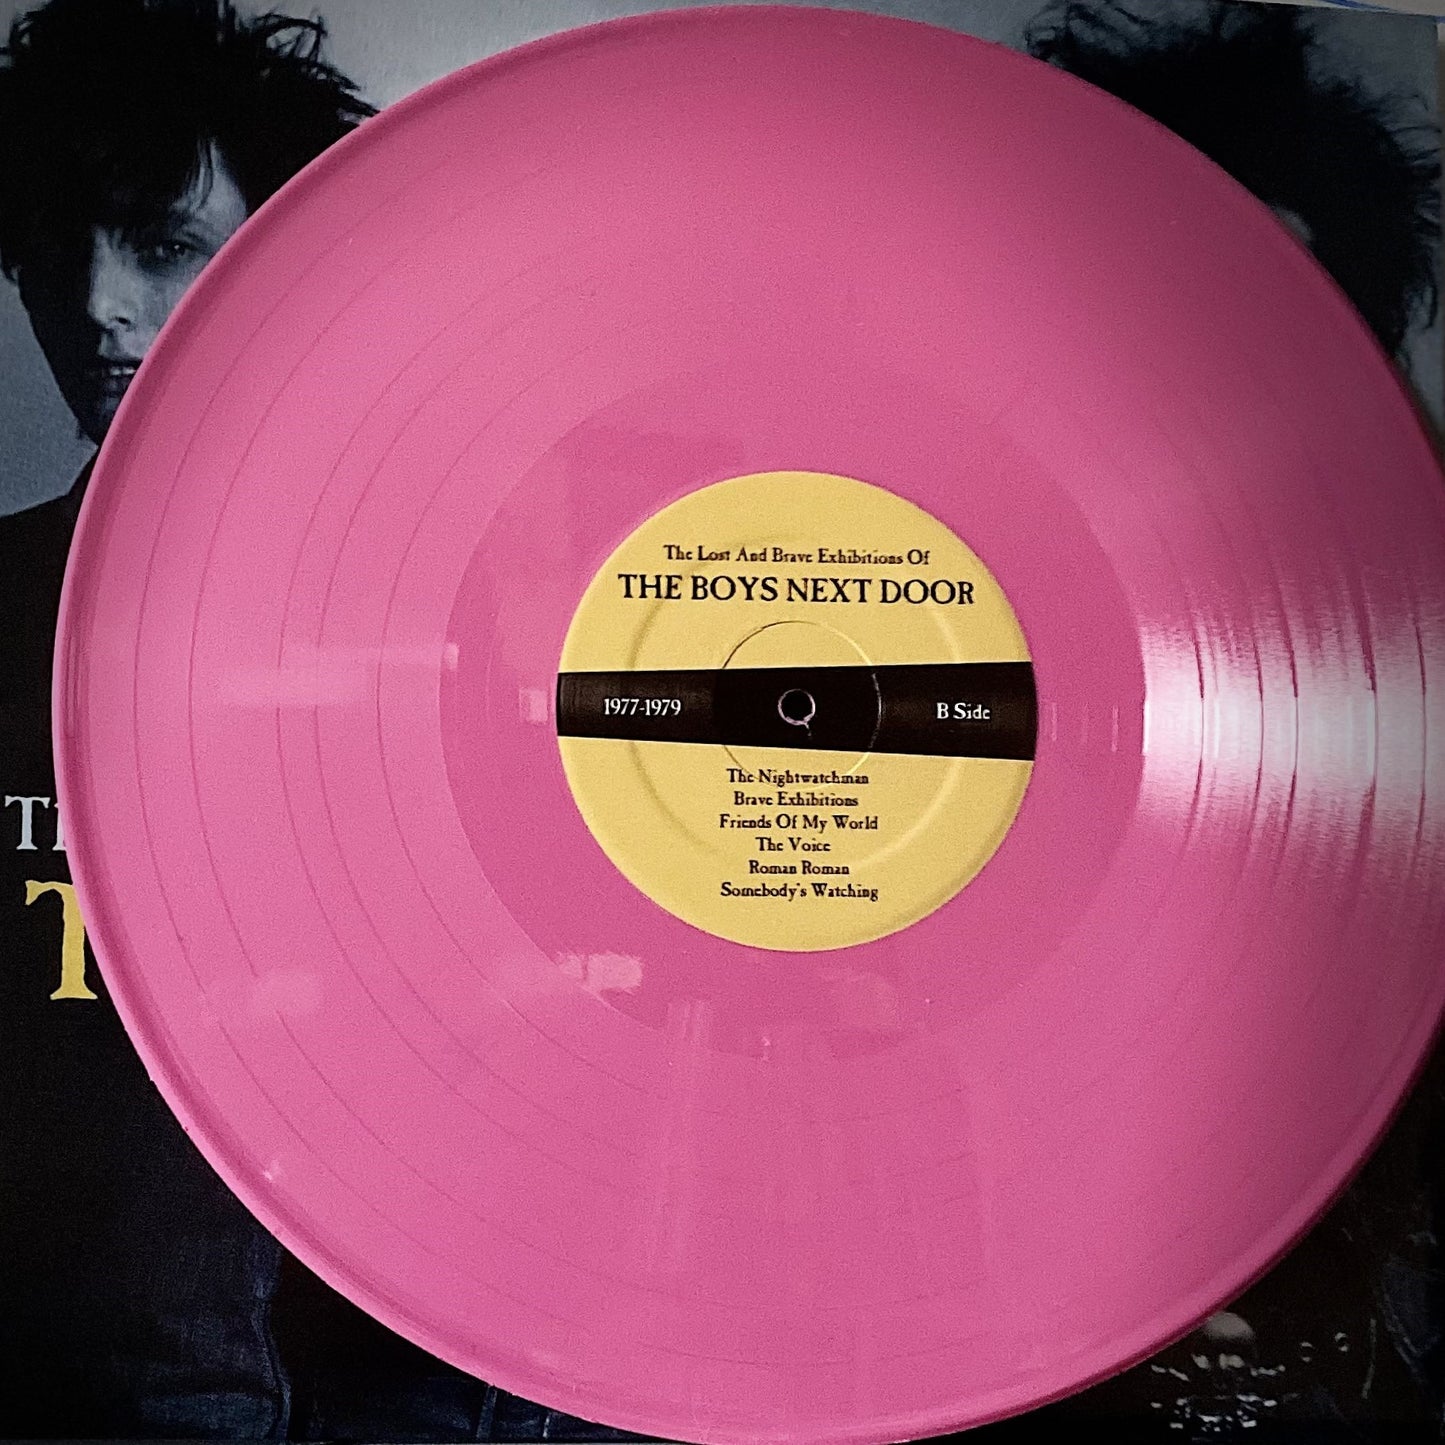 NICK CAVE / THE BOYS NEXT DOOR – The Lost and Brave Exhibitions Of LP (violet pink vinyl)